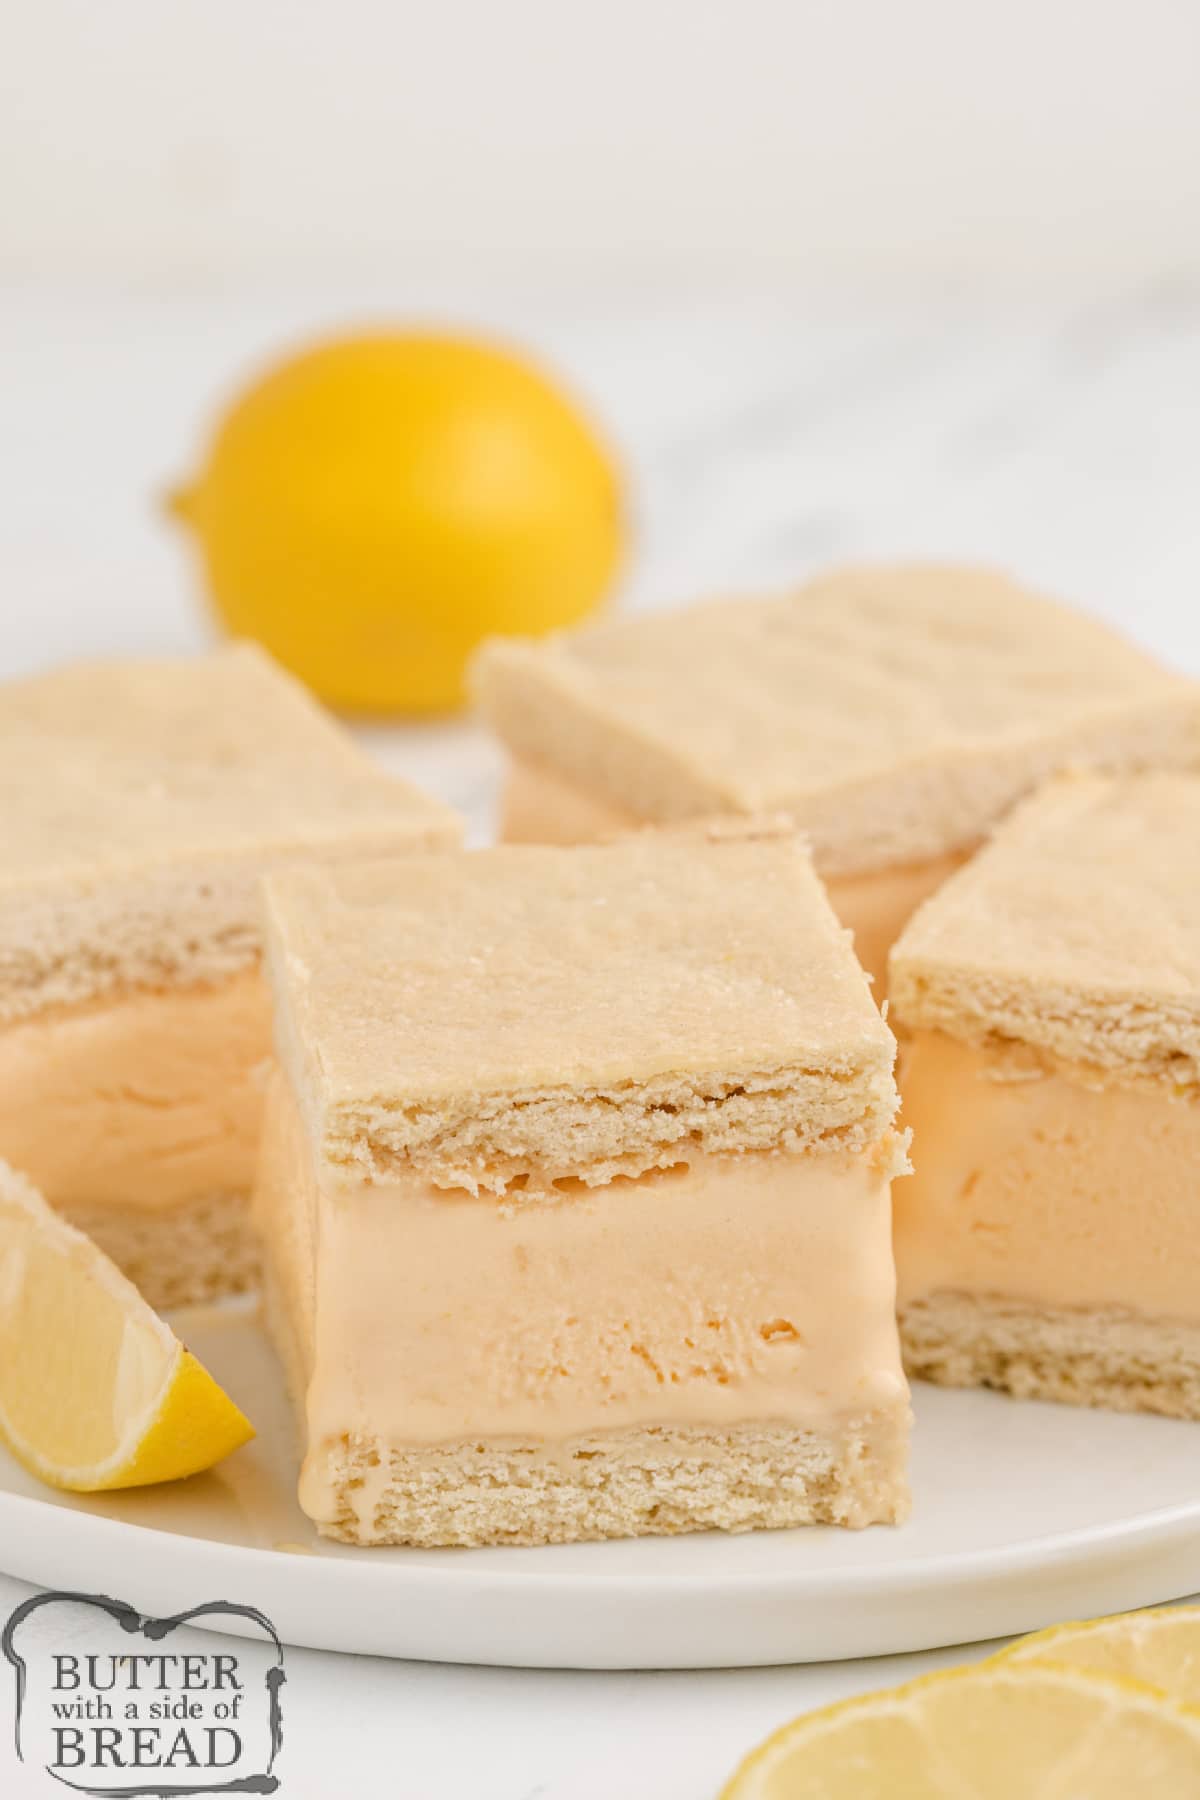 Lemon Ice Cream Bars are made with a delicious lemon ice cream filling sandwiched between two layers of homemade lemon cookie crust. This ice cream sandwich recipe is so simple to make, it makes a perfect summer treat!